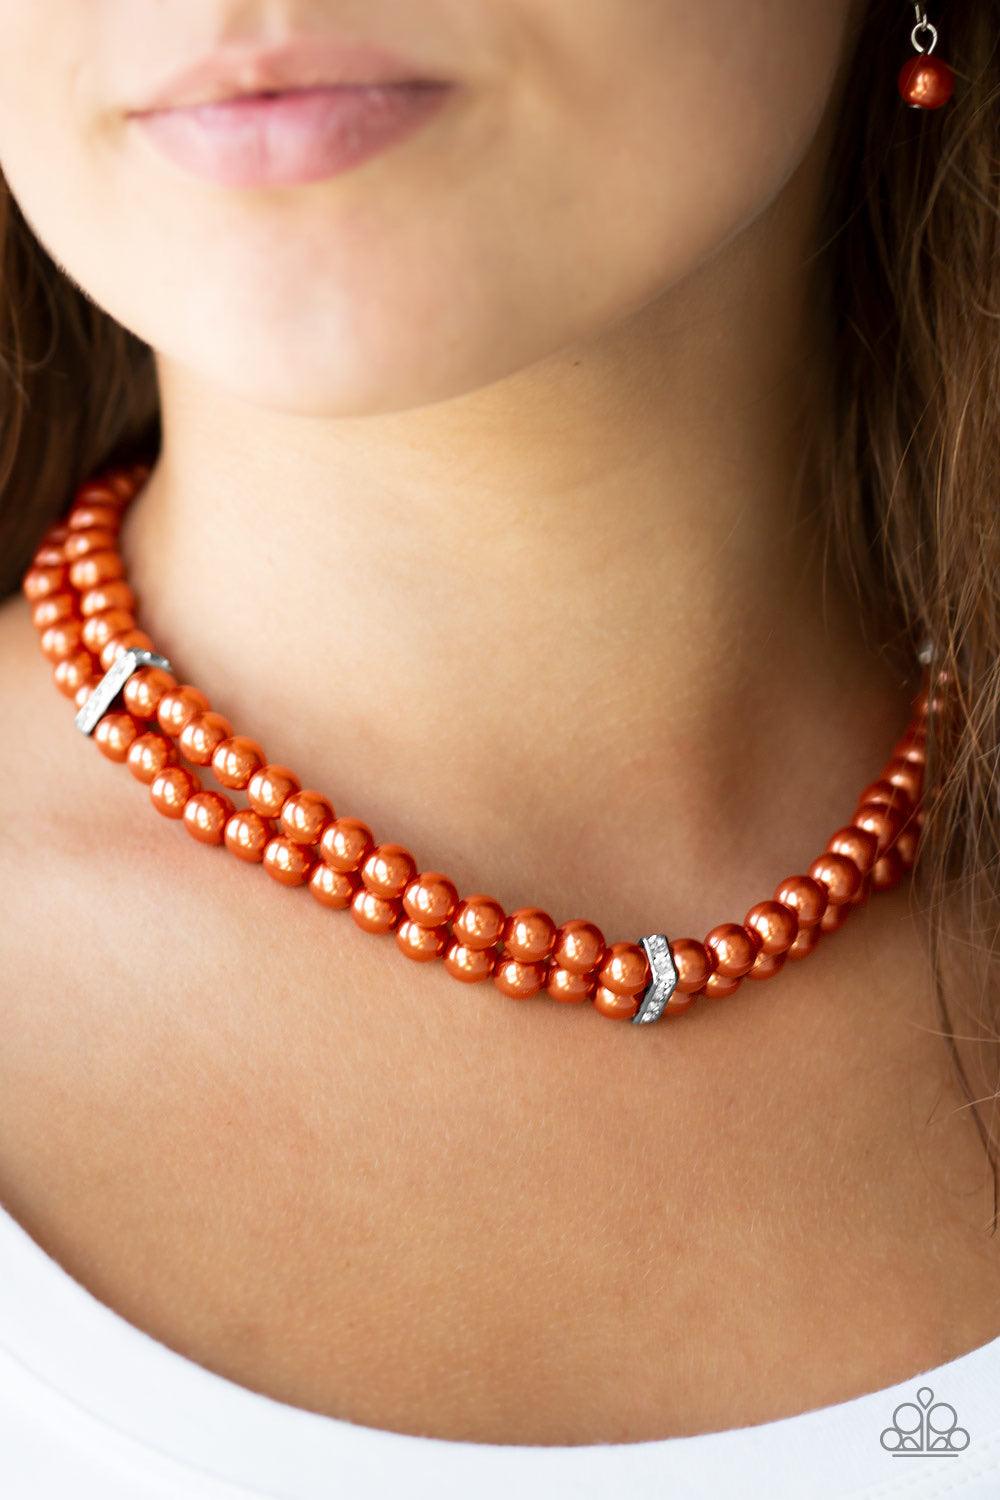 Paparazzi Accessories Put On Your Party Dress - Orange Pinched between white rhinestone encrusted frames, strands of classic orange pearls layer below the collar for a timeless look. Features an adjustable clasp closure. Jewelry